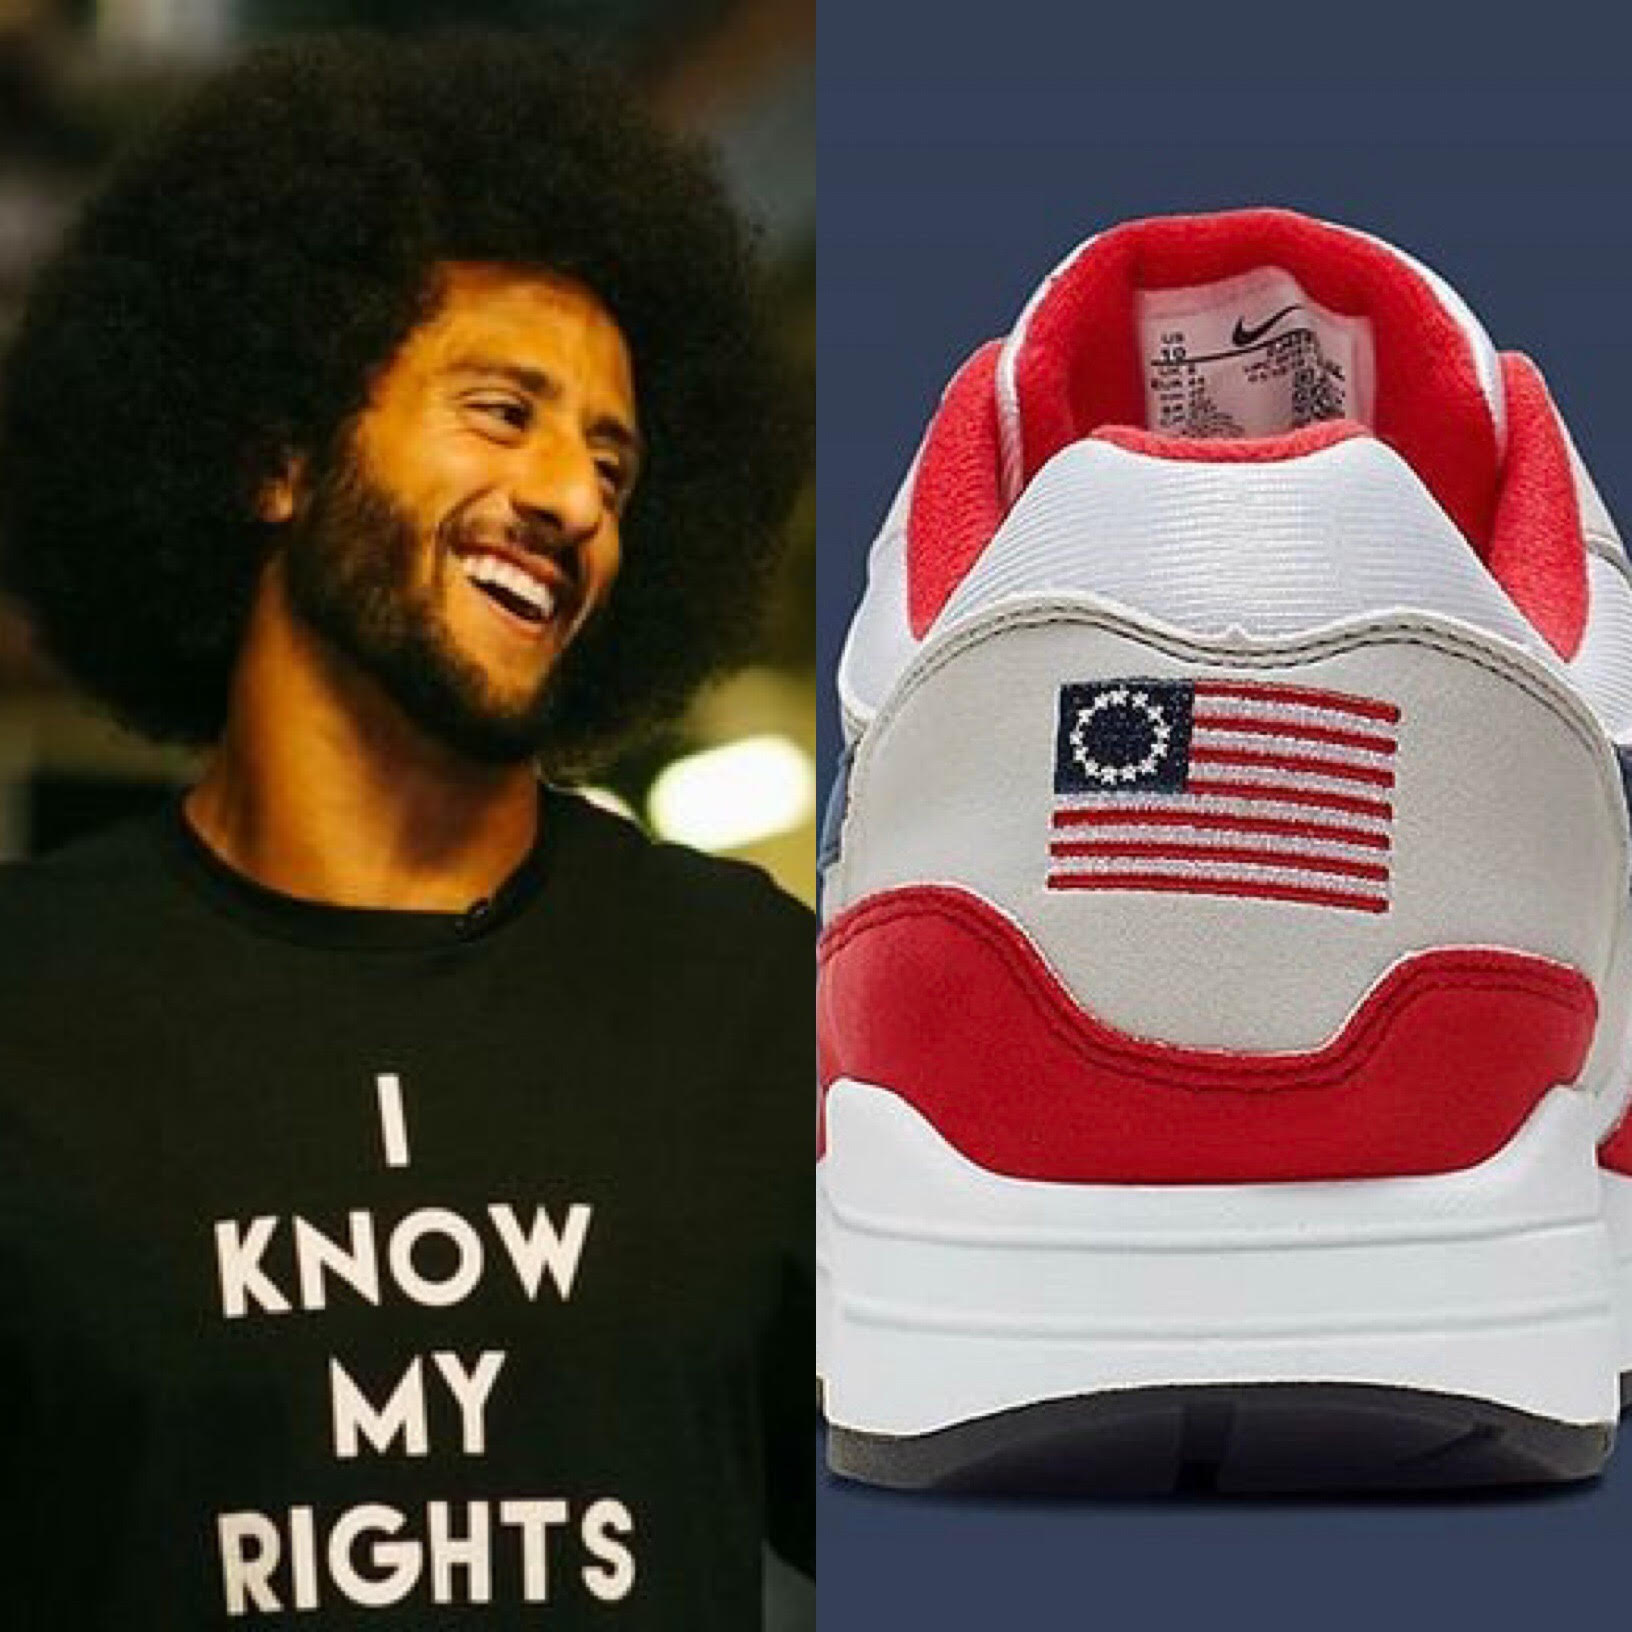 nike pulls shoes with american flag